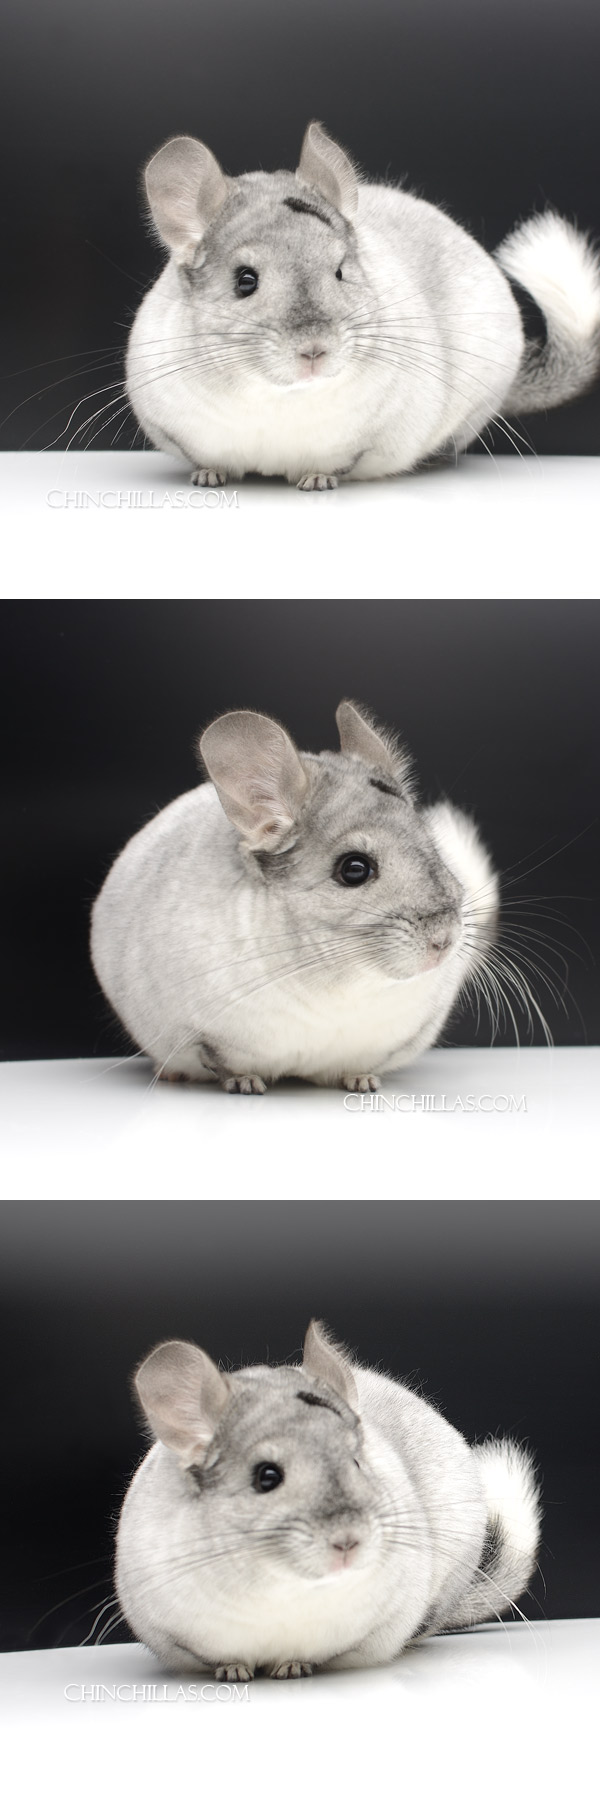 Chinchilla or related item offered for sale or export on Chinchillas.com - 24051 Extra Large Reserve Champion White Mosaic Female Chinchilla